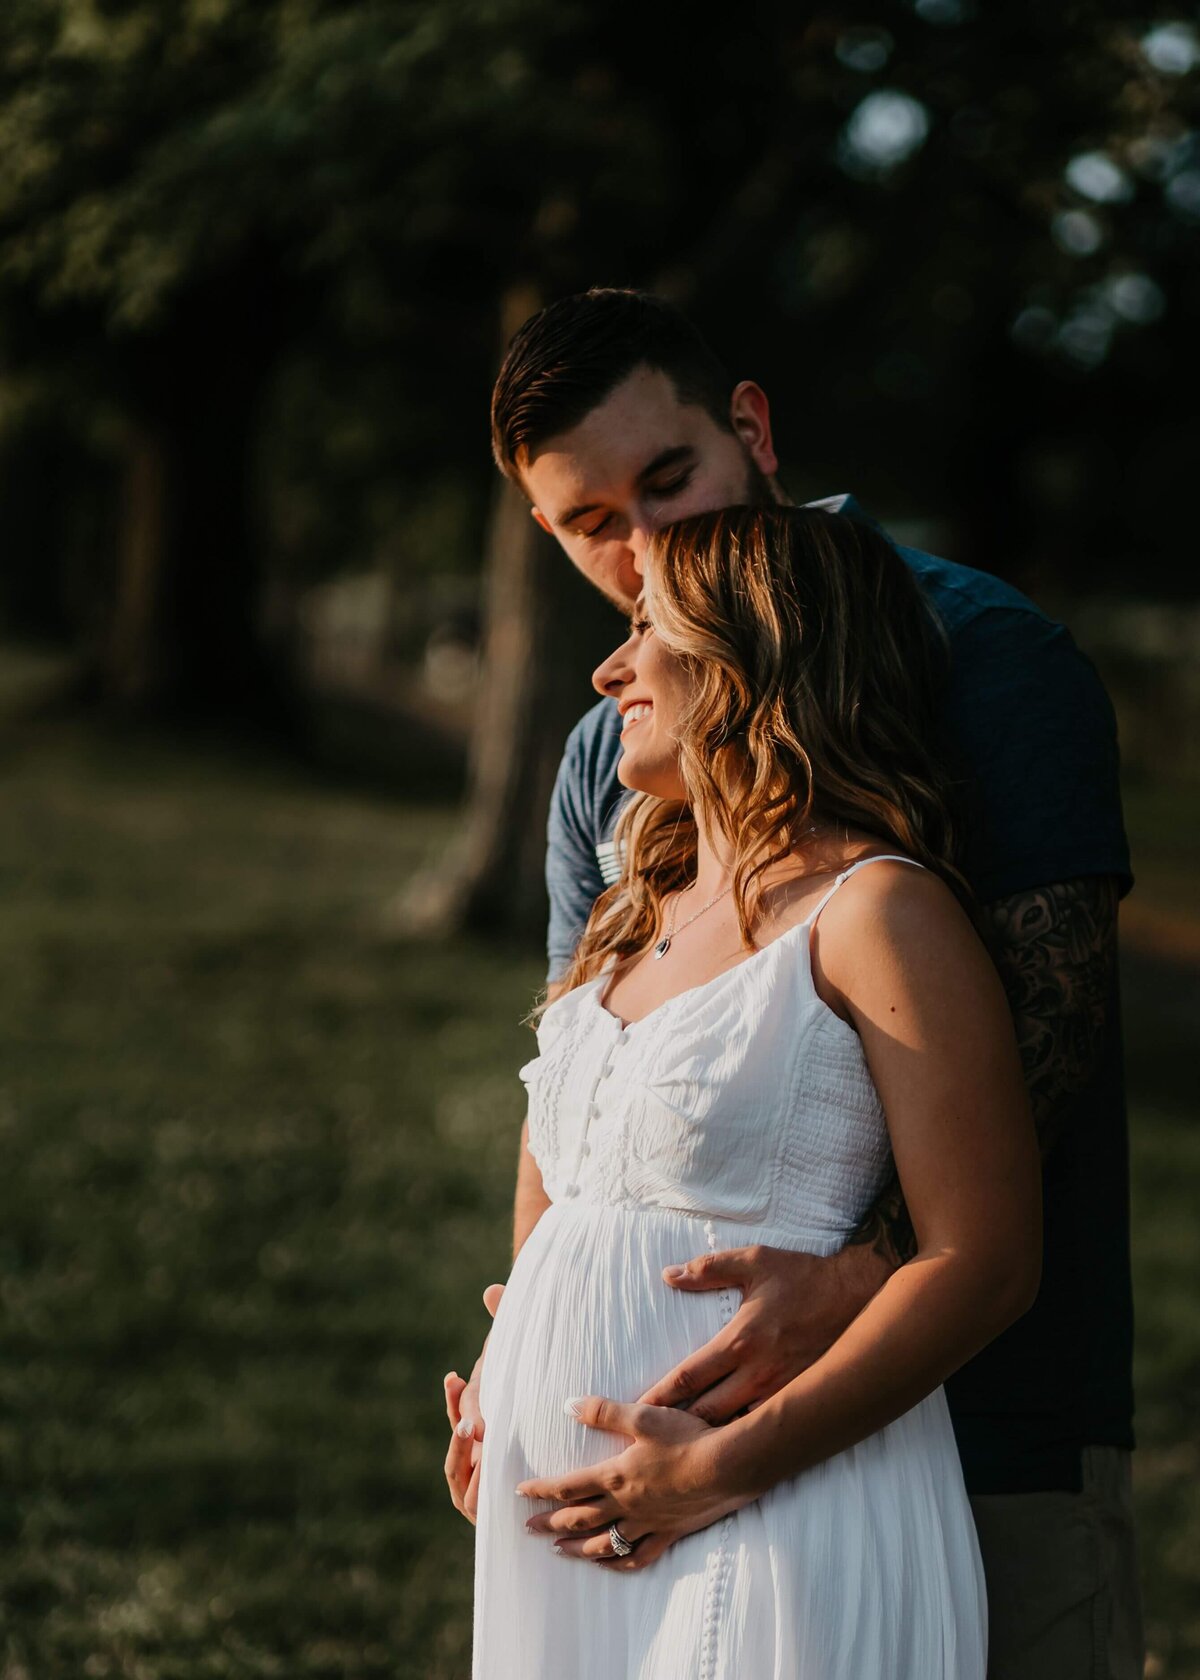 Pittsburgh maternity photographer captures a pregnant couple embracing in a field.